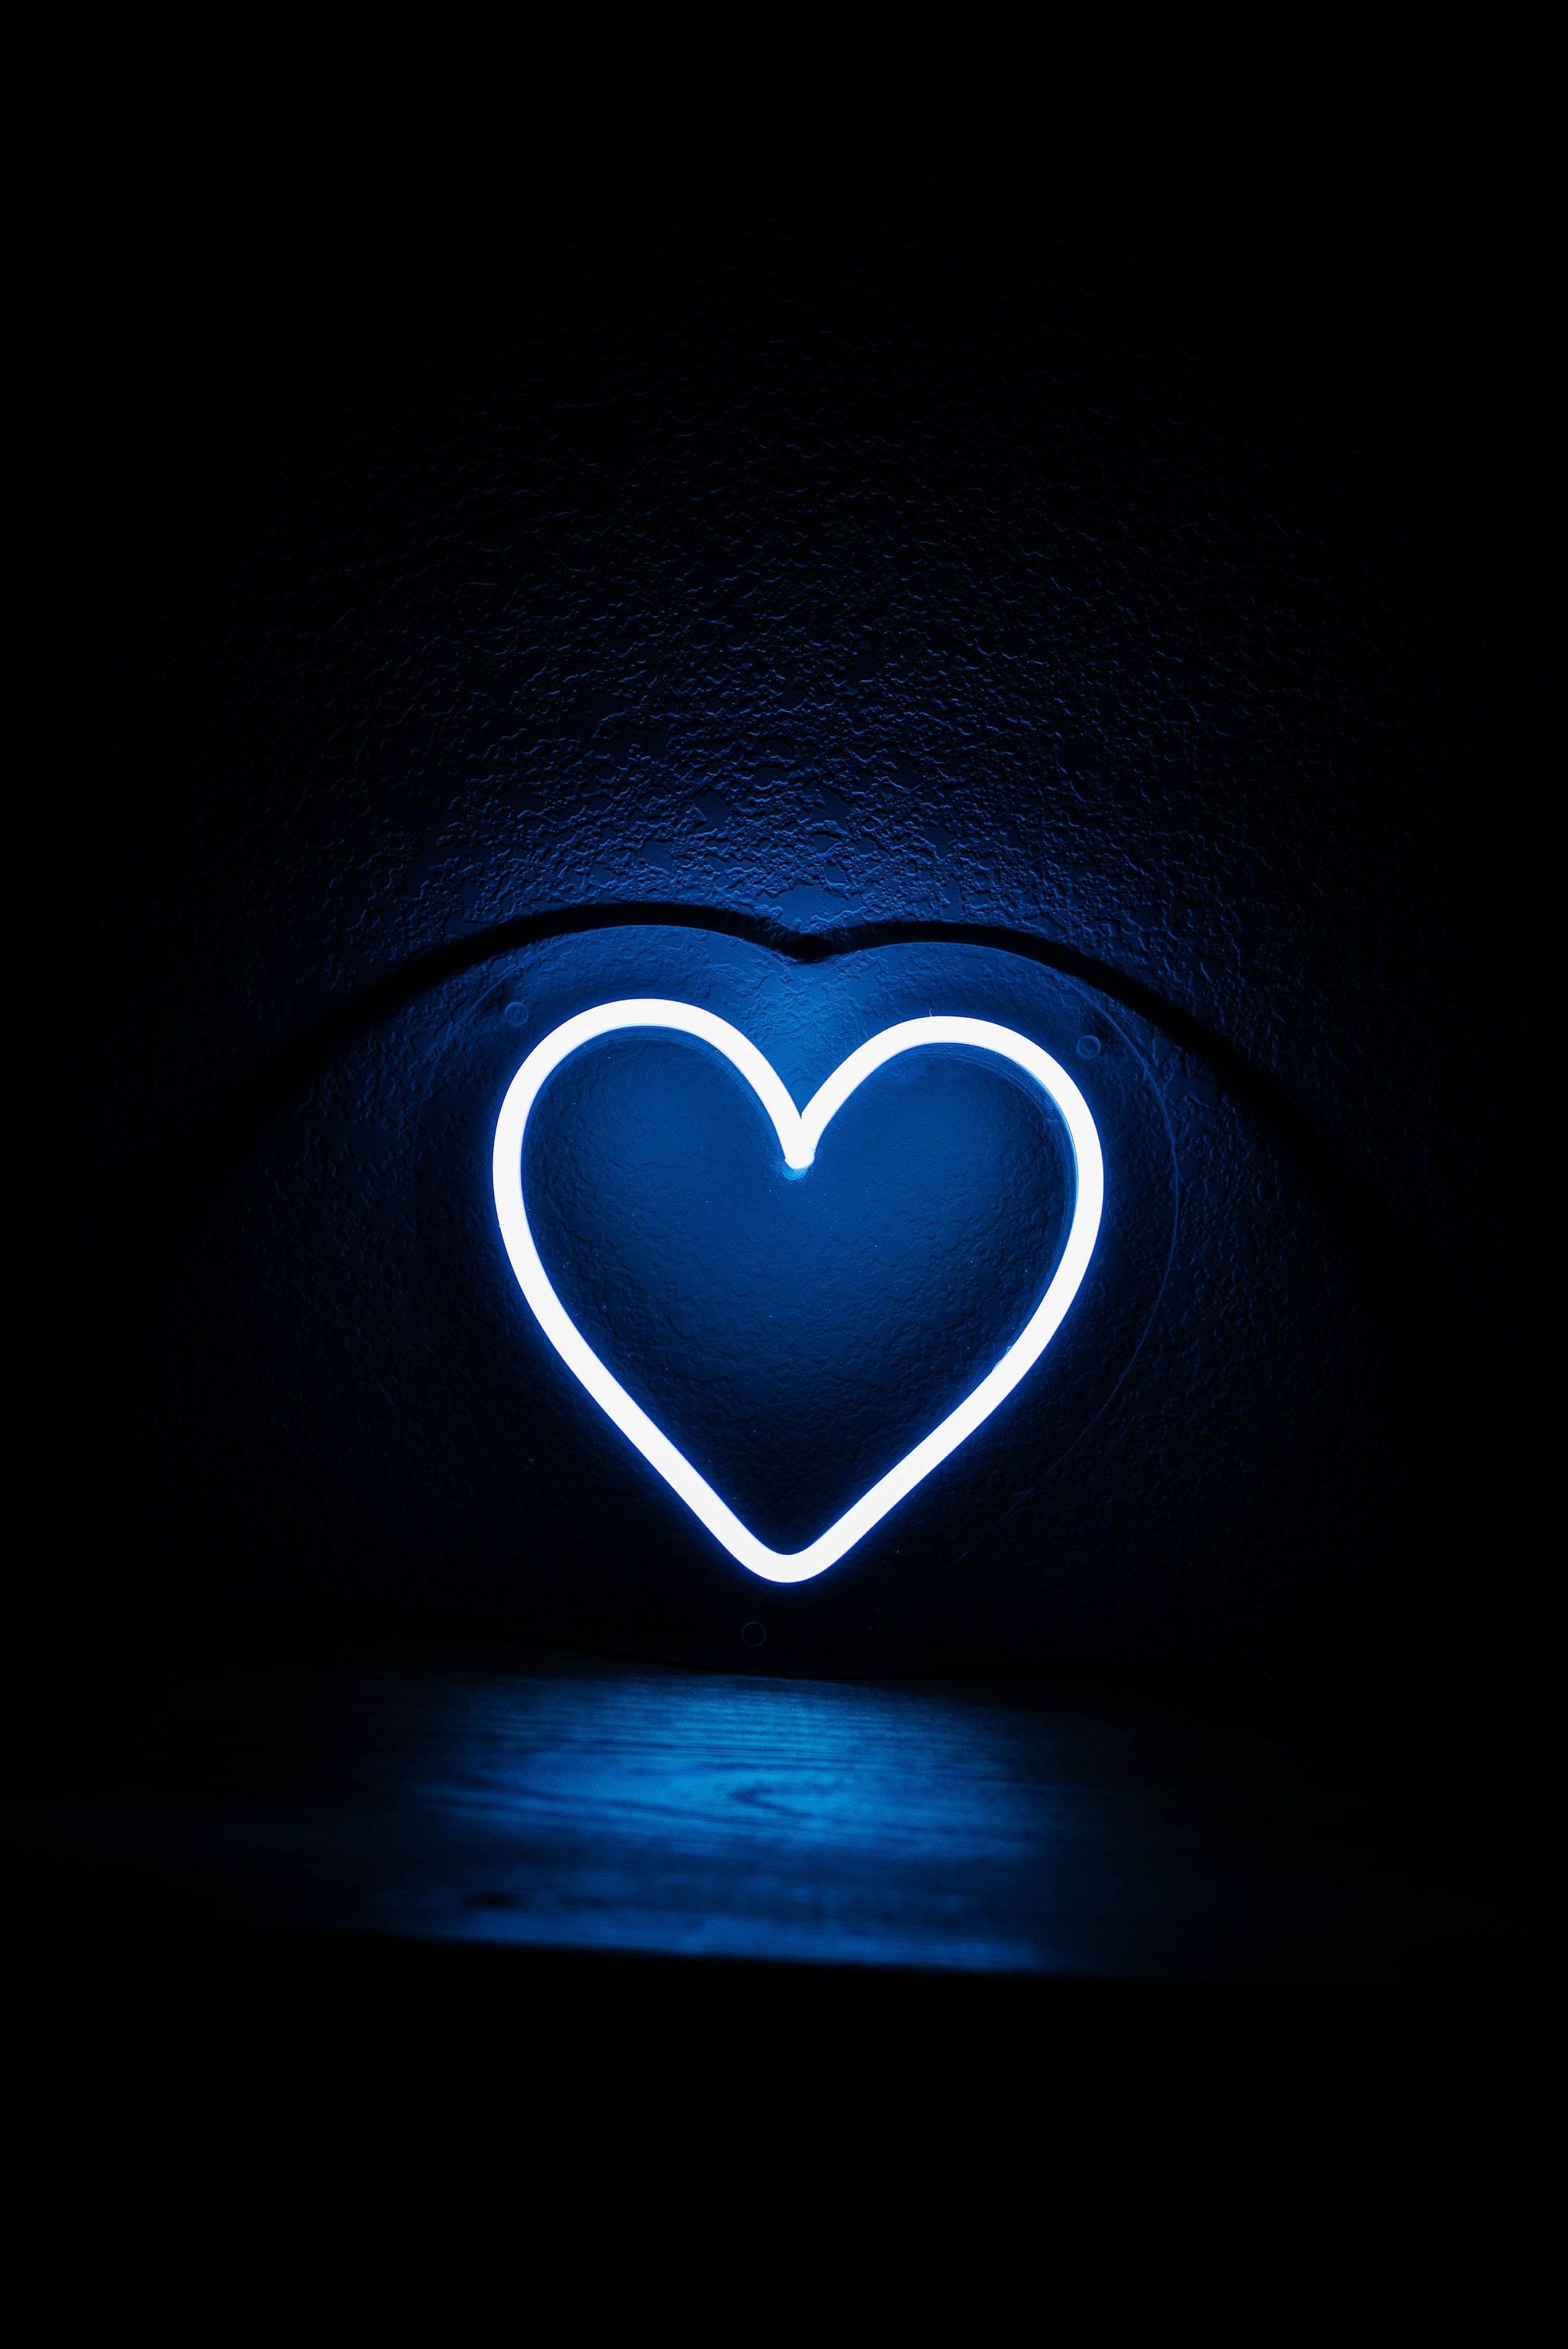 Heart blue background - romantic and elegant designs for free